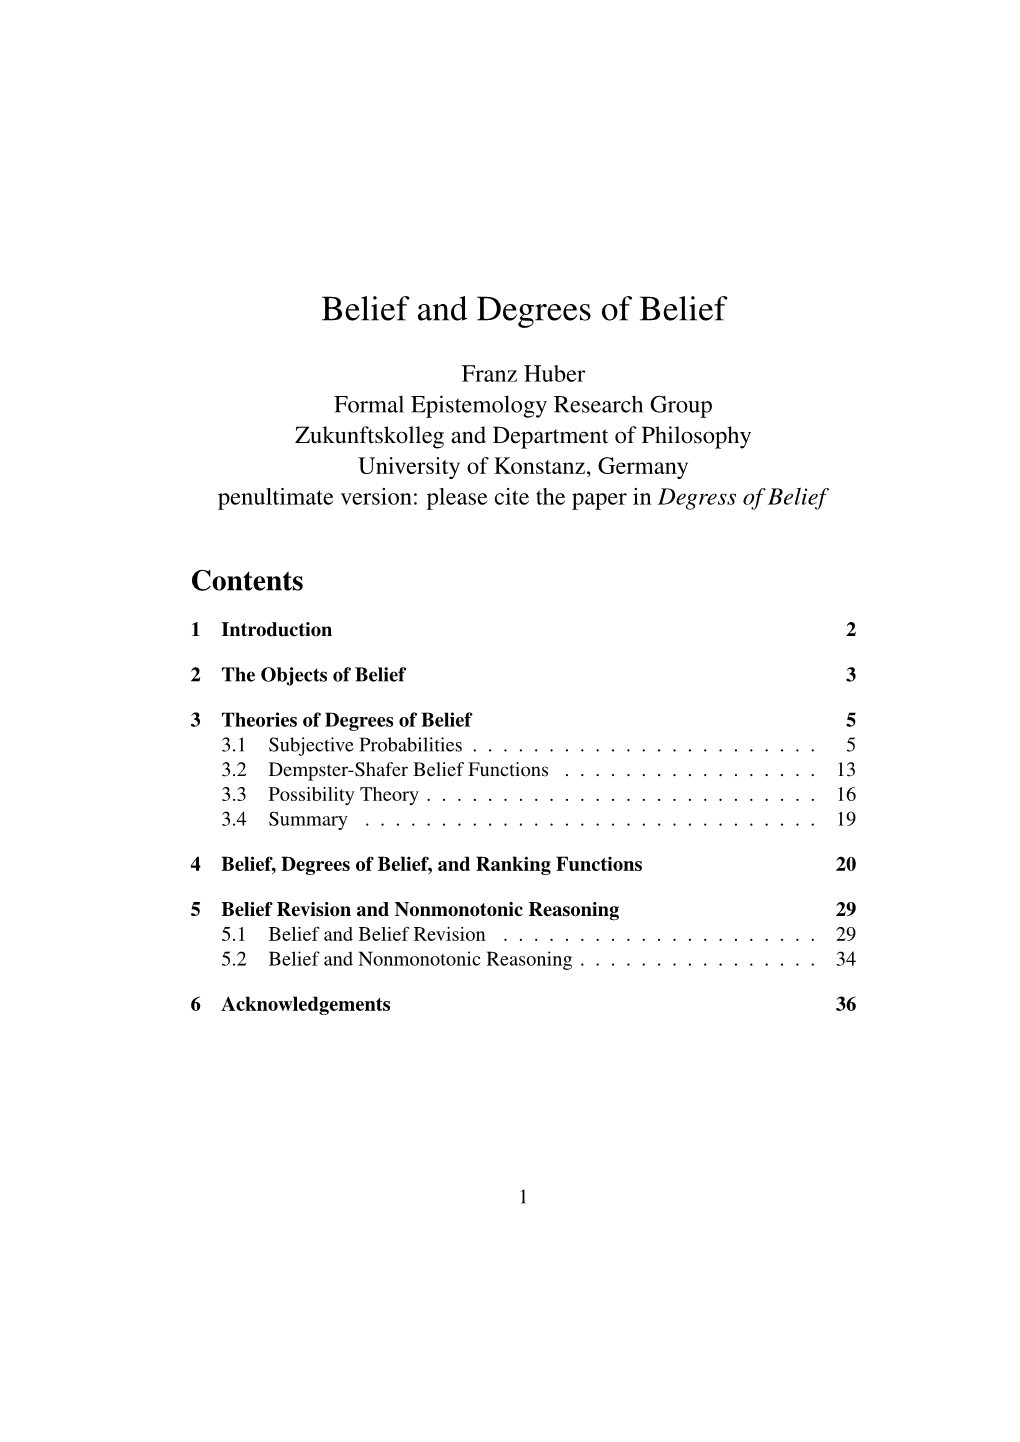 Belief and Degrees of Belief